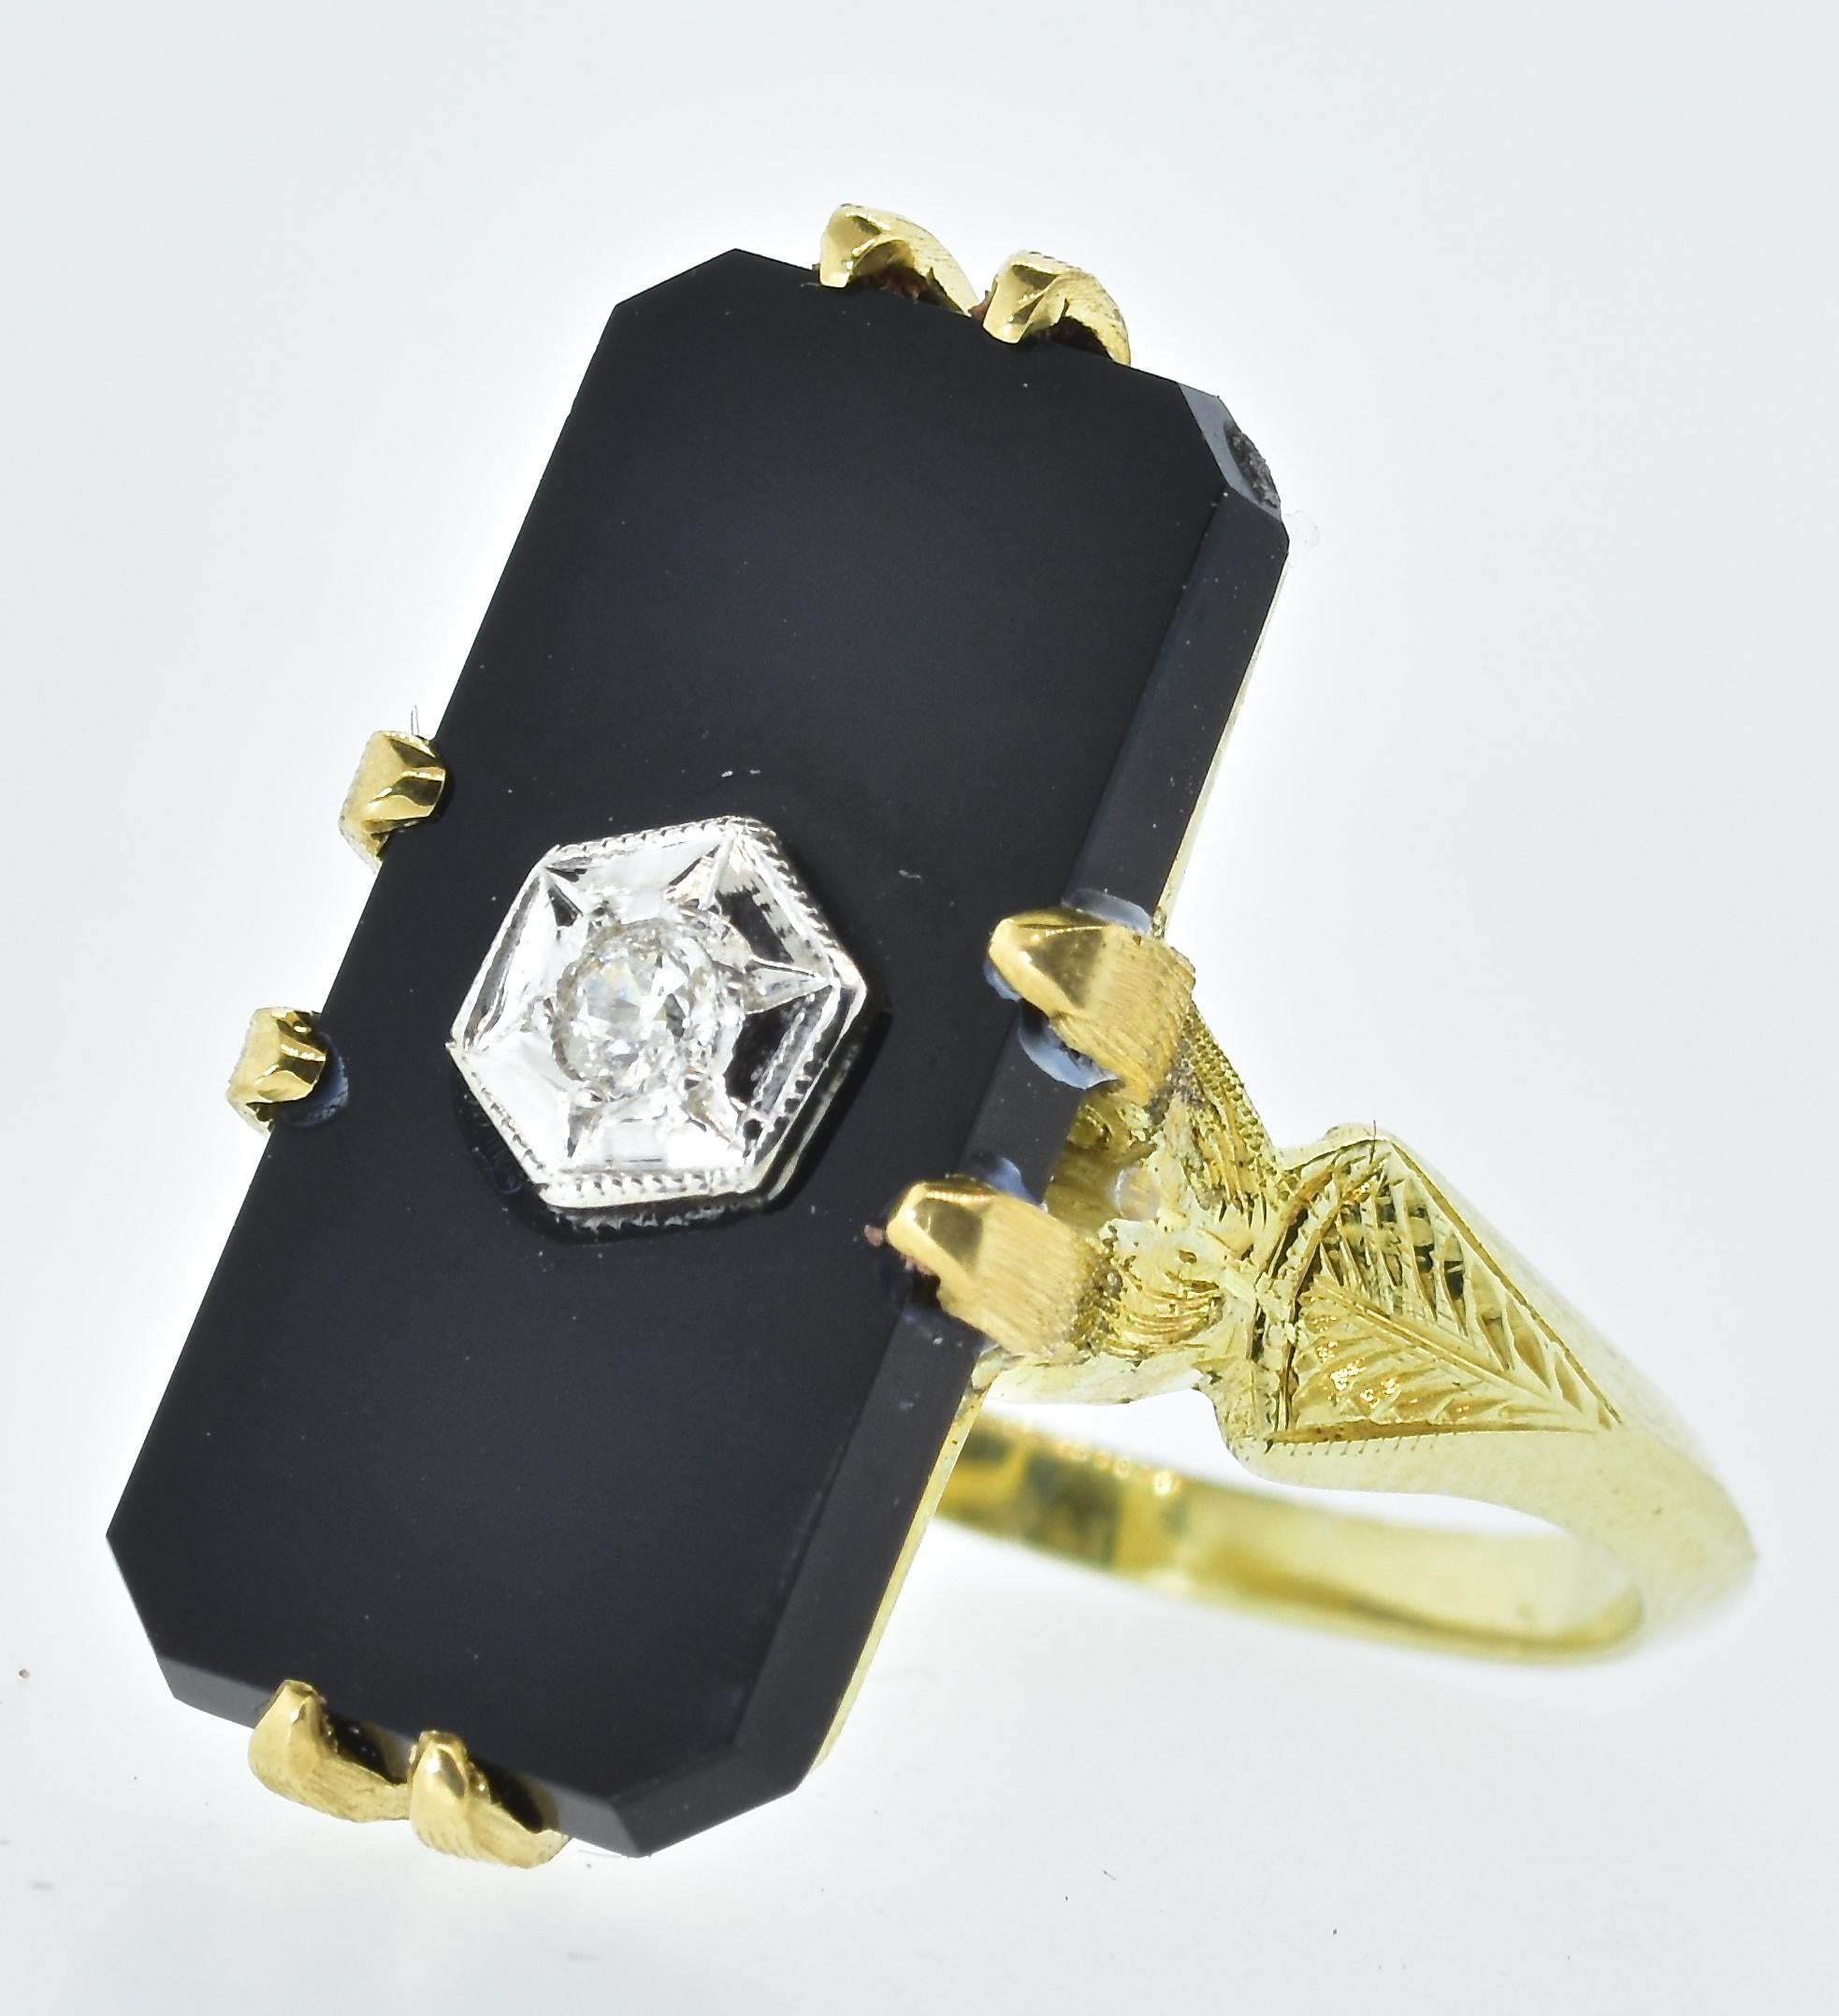 Onyx and diamond vintage yellow gold ring in fine condition centering a prong set rectangular cut black onyx set in the center with a fine white old European cut diamond.  This diamond is set in a white gold star-like bezel surrounded with